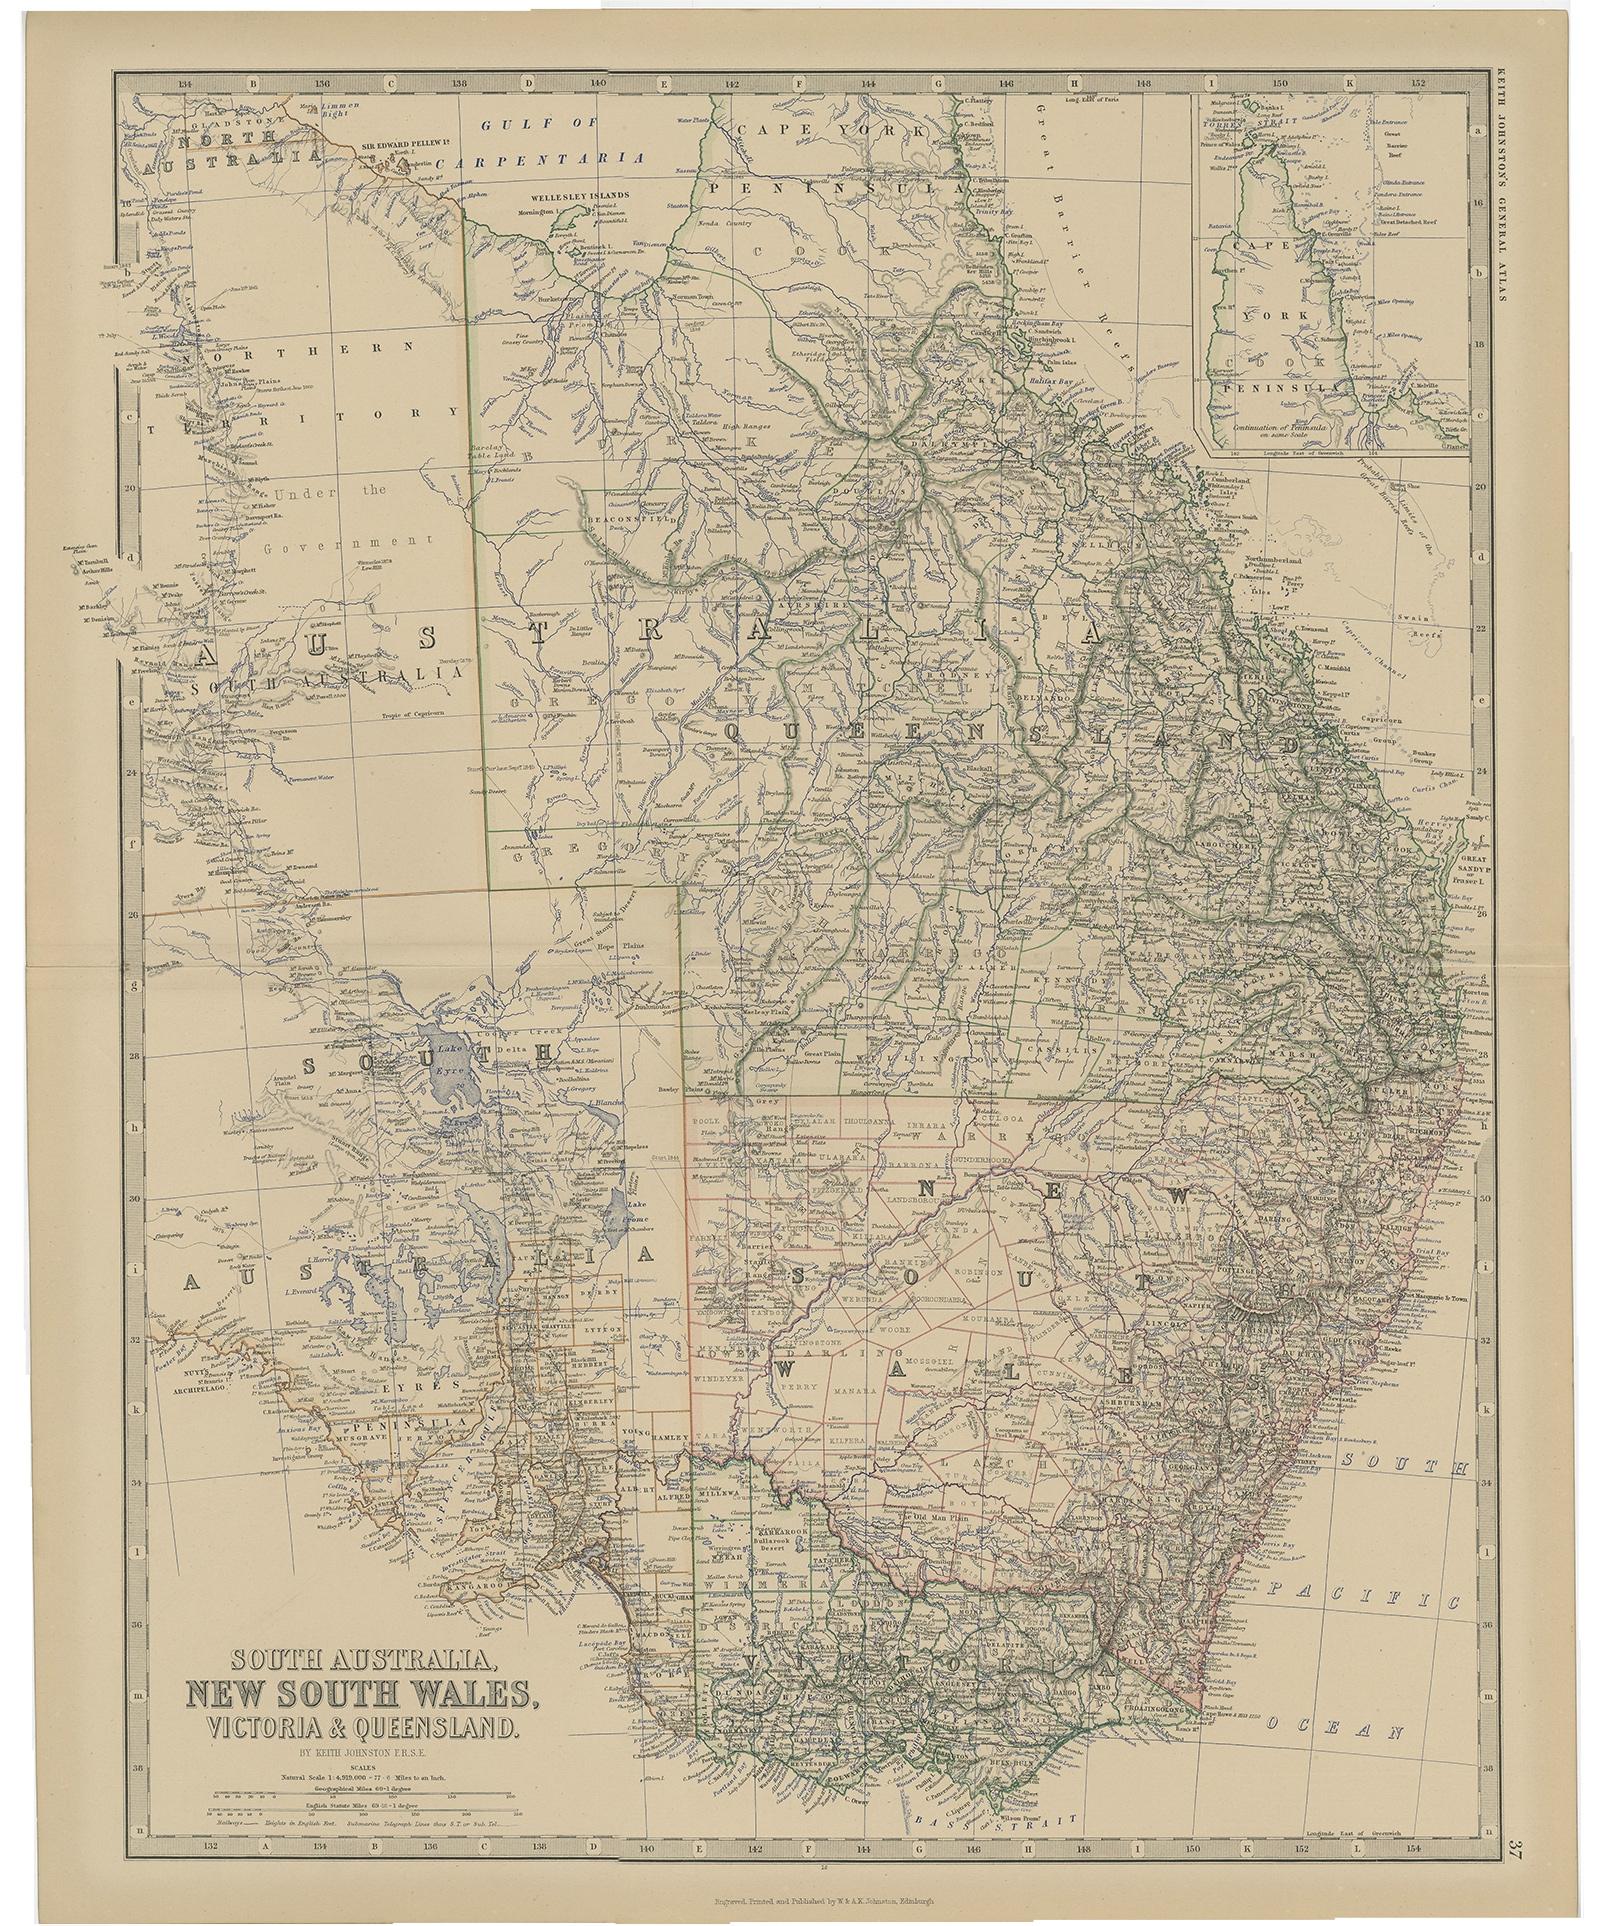 Antique map titled 'South Australia, New South Wales, Victoria & Queensland'. 

Old map of Southern Australia, with an inset map of Cape York Peninsula. This map originates from 'The Royal Atlas of Modern Geography, Exhibiting, in a Series of